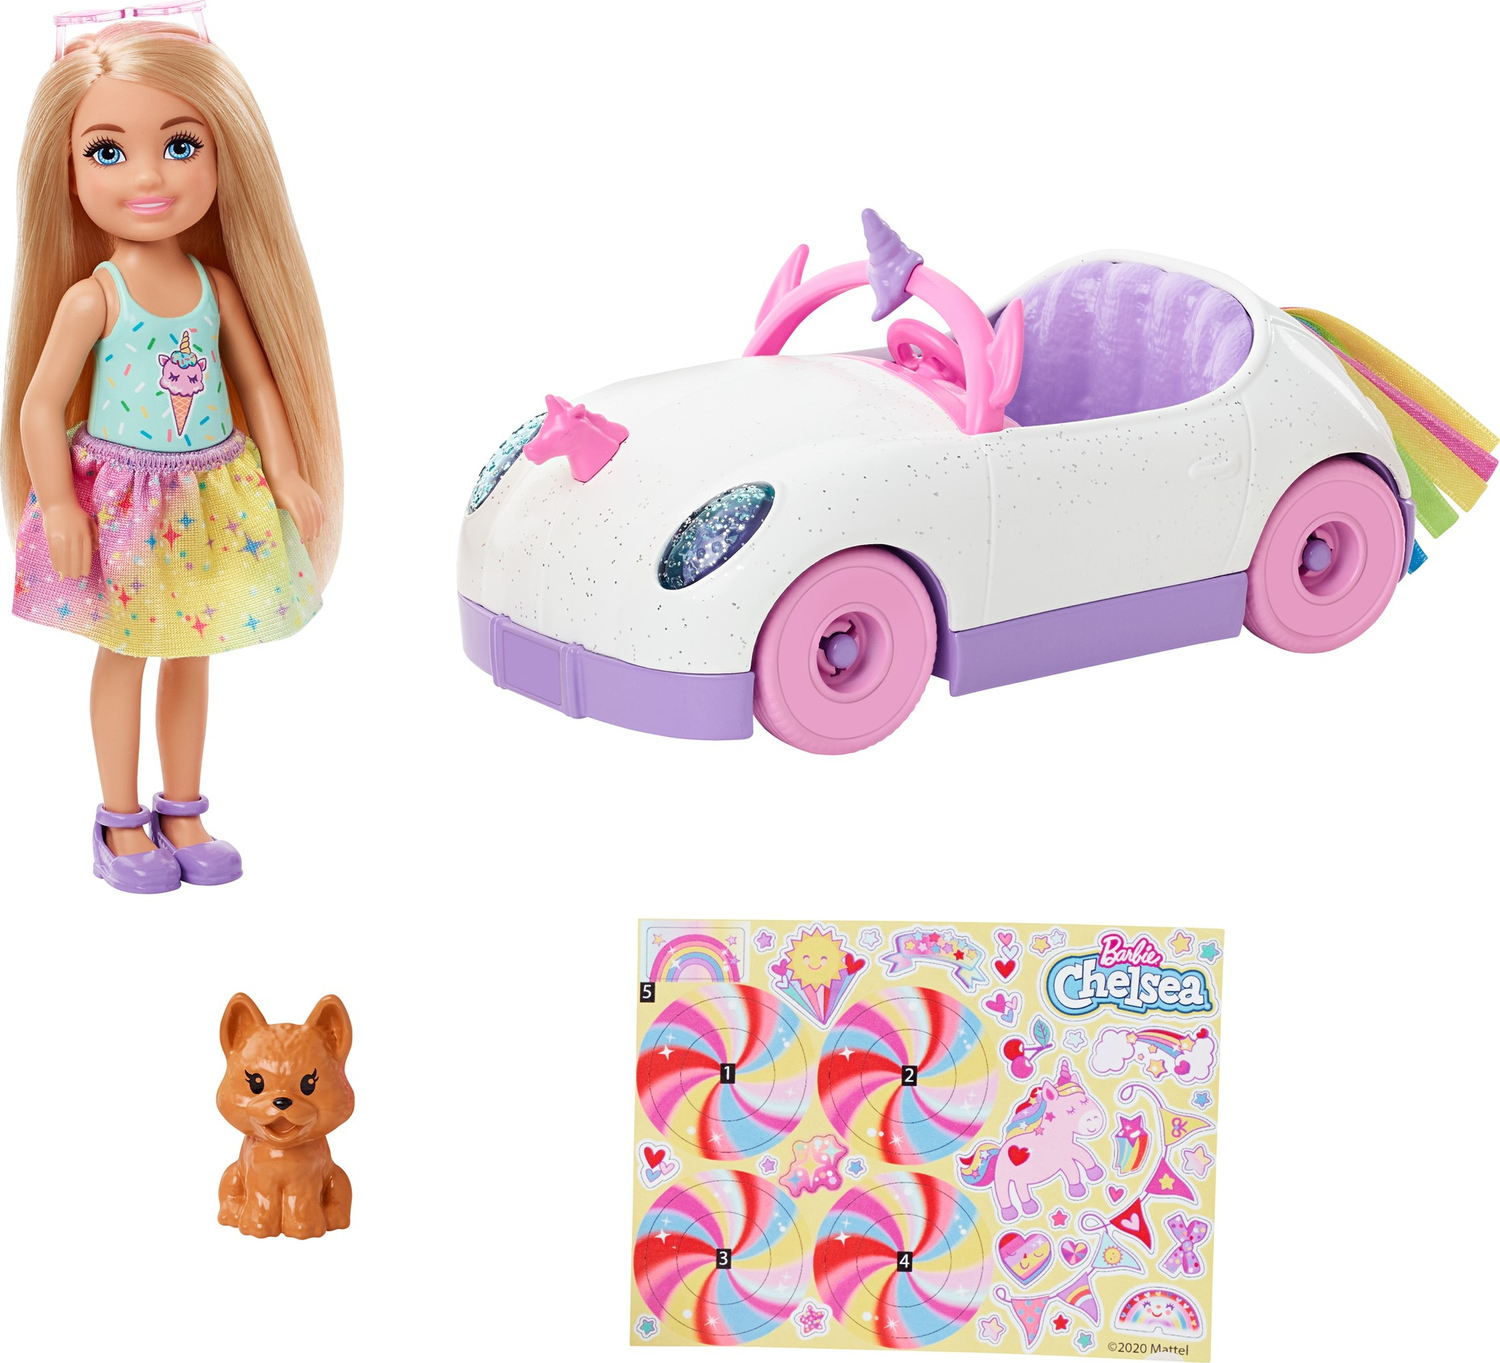 Barbie Chelsea Doll And Car